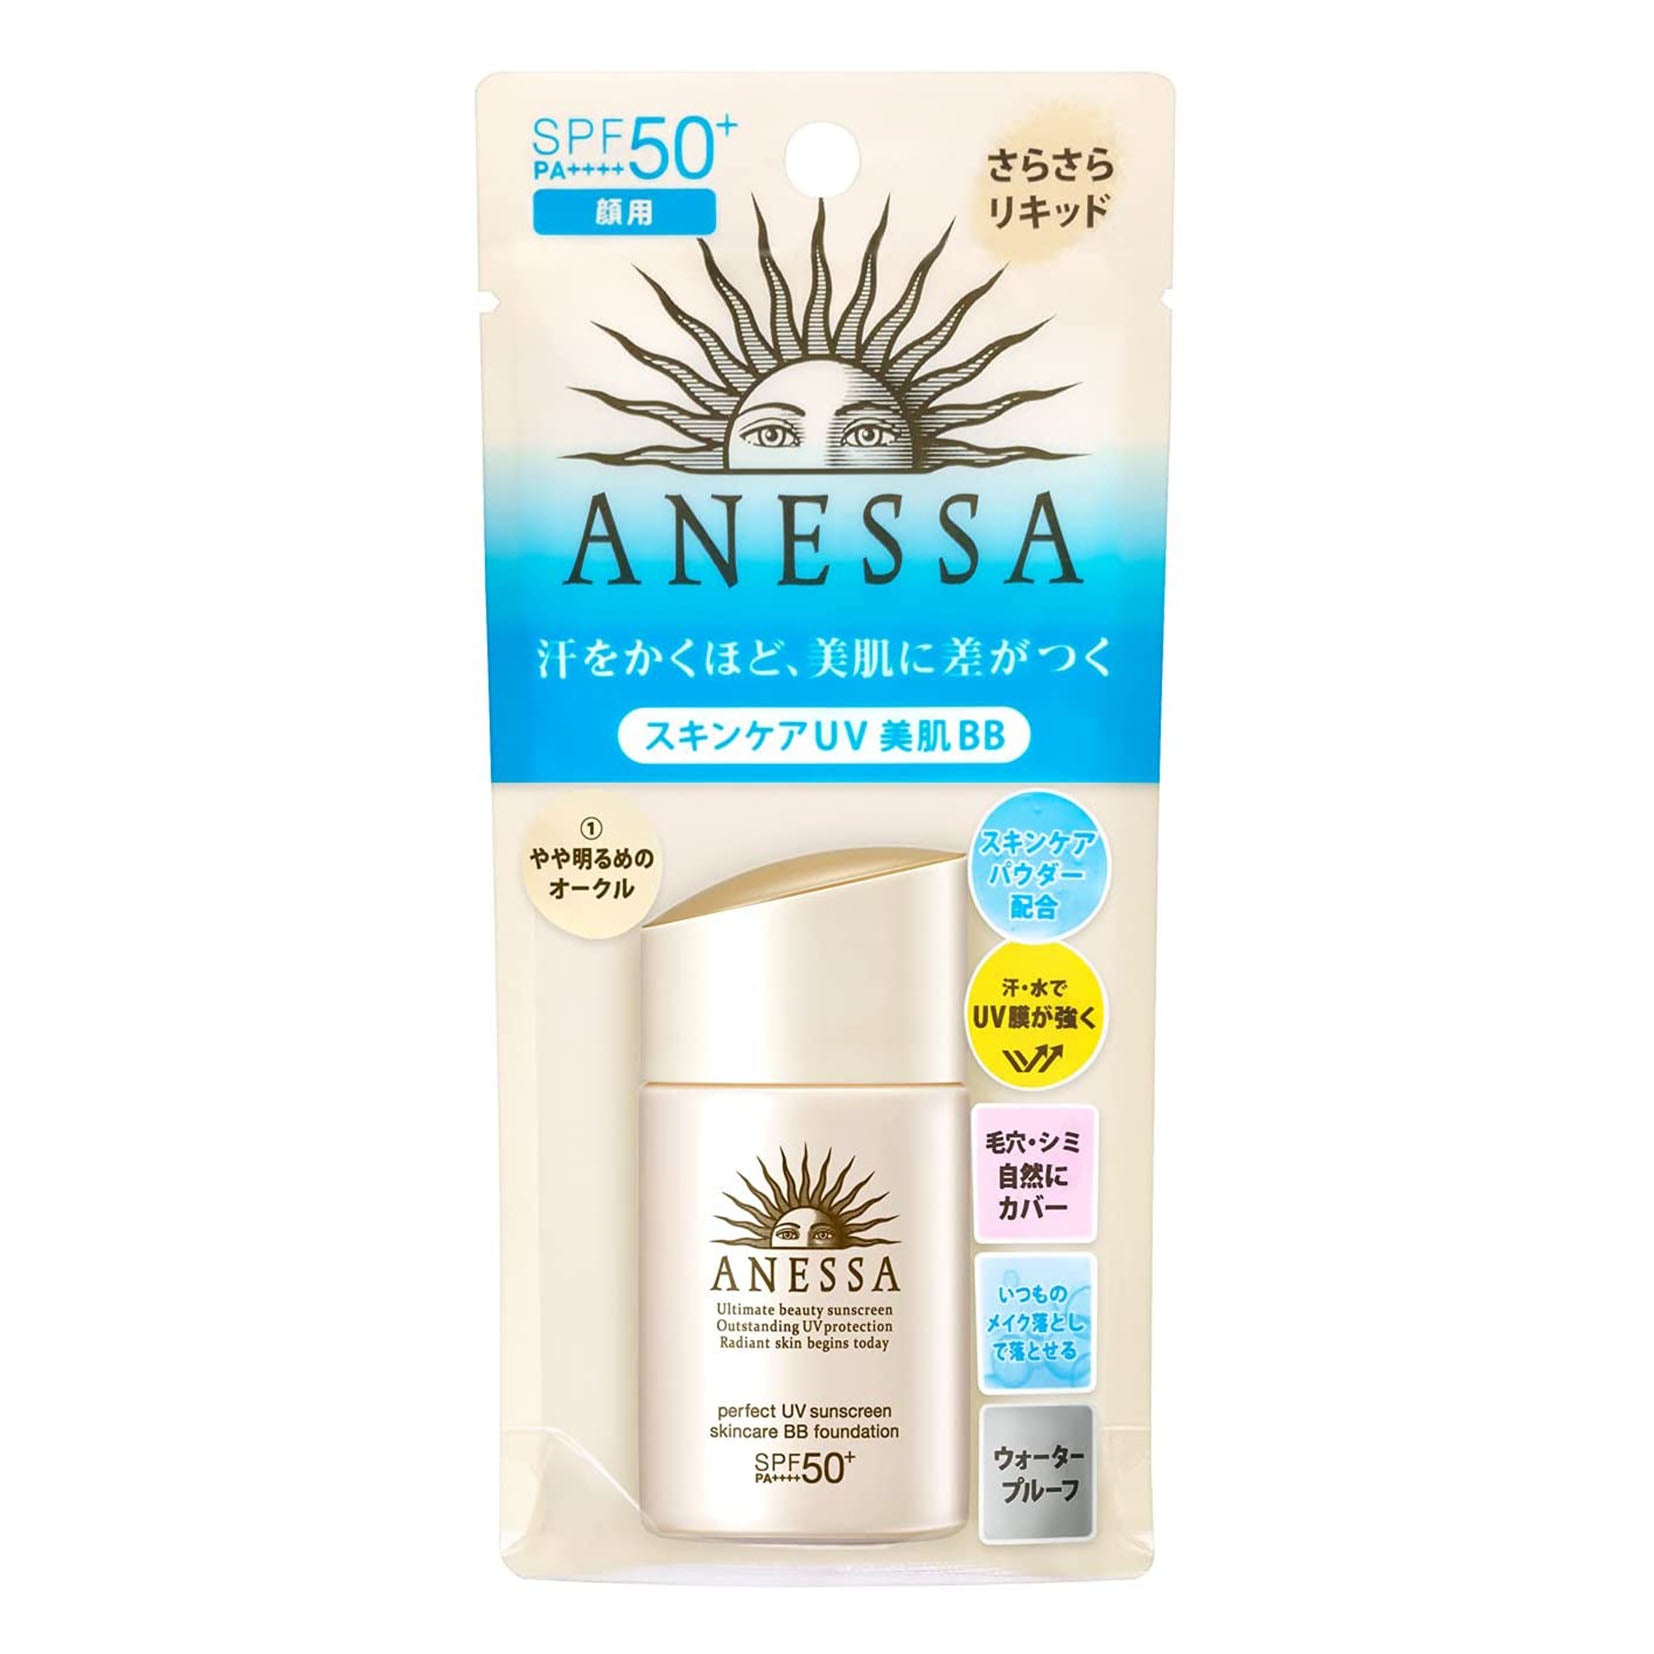 Shiseido Anessa Perfect UV Skin Care BB Foundation SPF50+/PA++++ 25ml - Light Beige - Harajuku Culture Japan - Japanease Products Store Beauty and Stationery